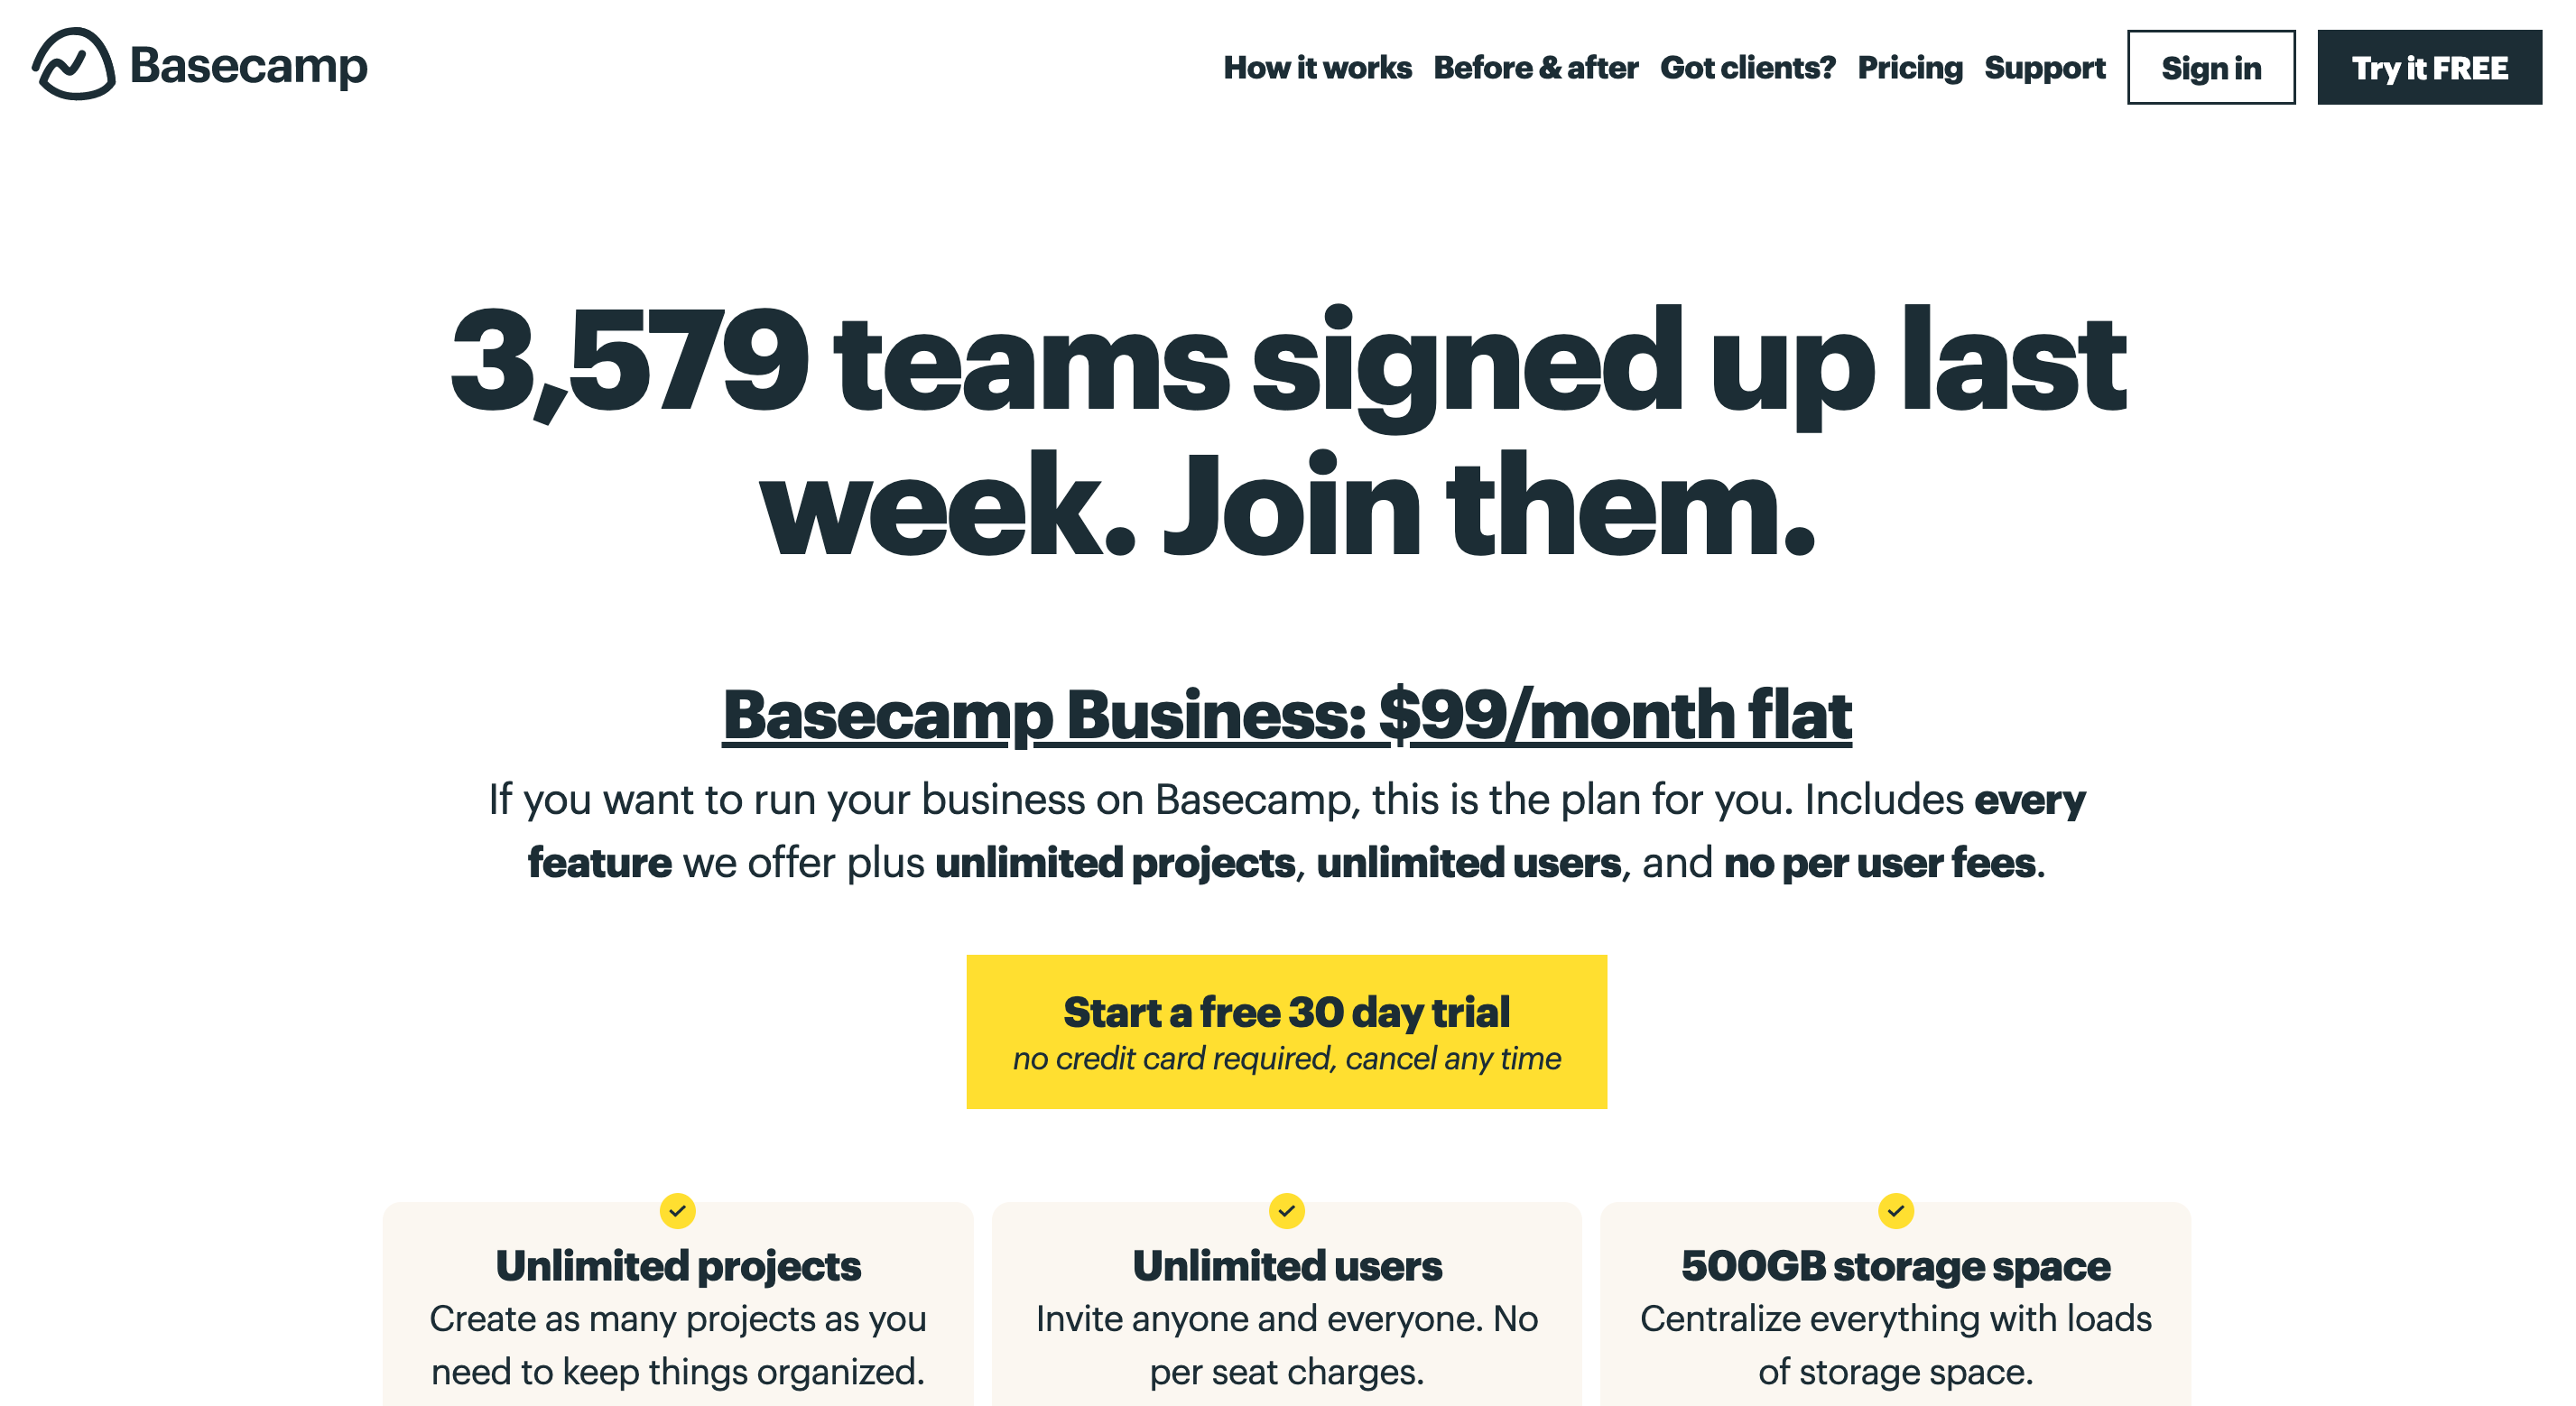 Basecamp pricing page: Basecamp Business: $99/month flat